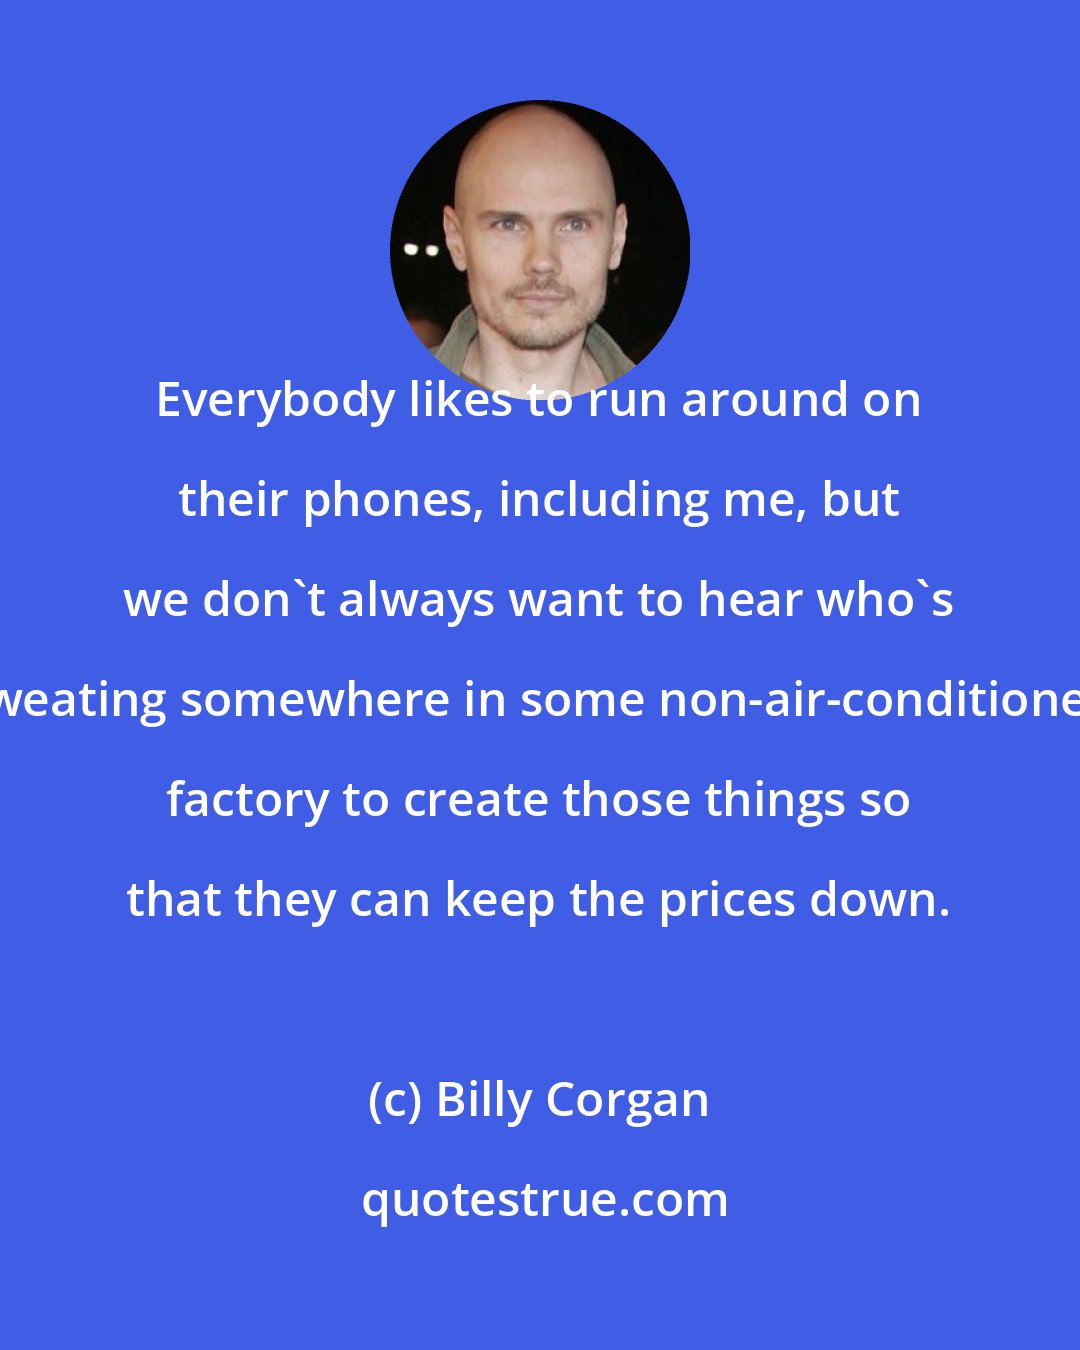 Billy Corgan: Everybody likes to run around on their phones, including me, but we don't always want to hear who's sweating somewhere in some non-air-conditioned factory to create those things so that they can keep the prices down.